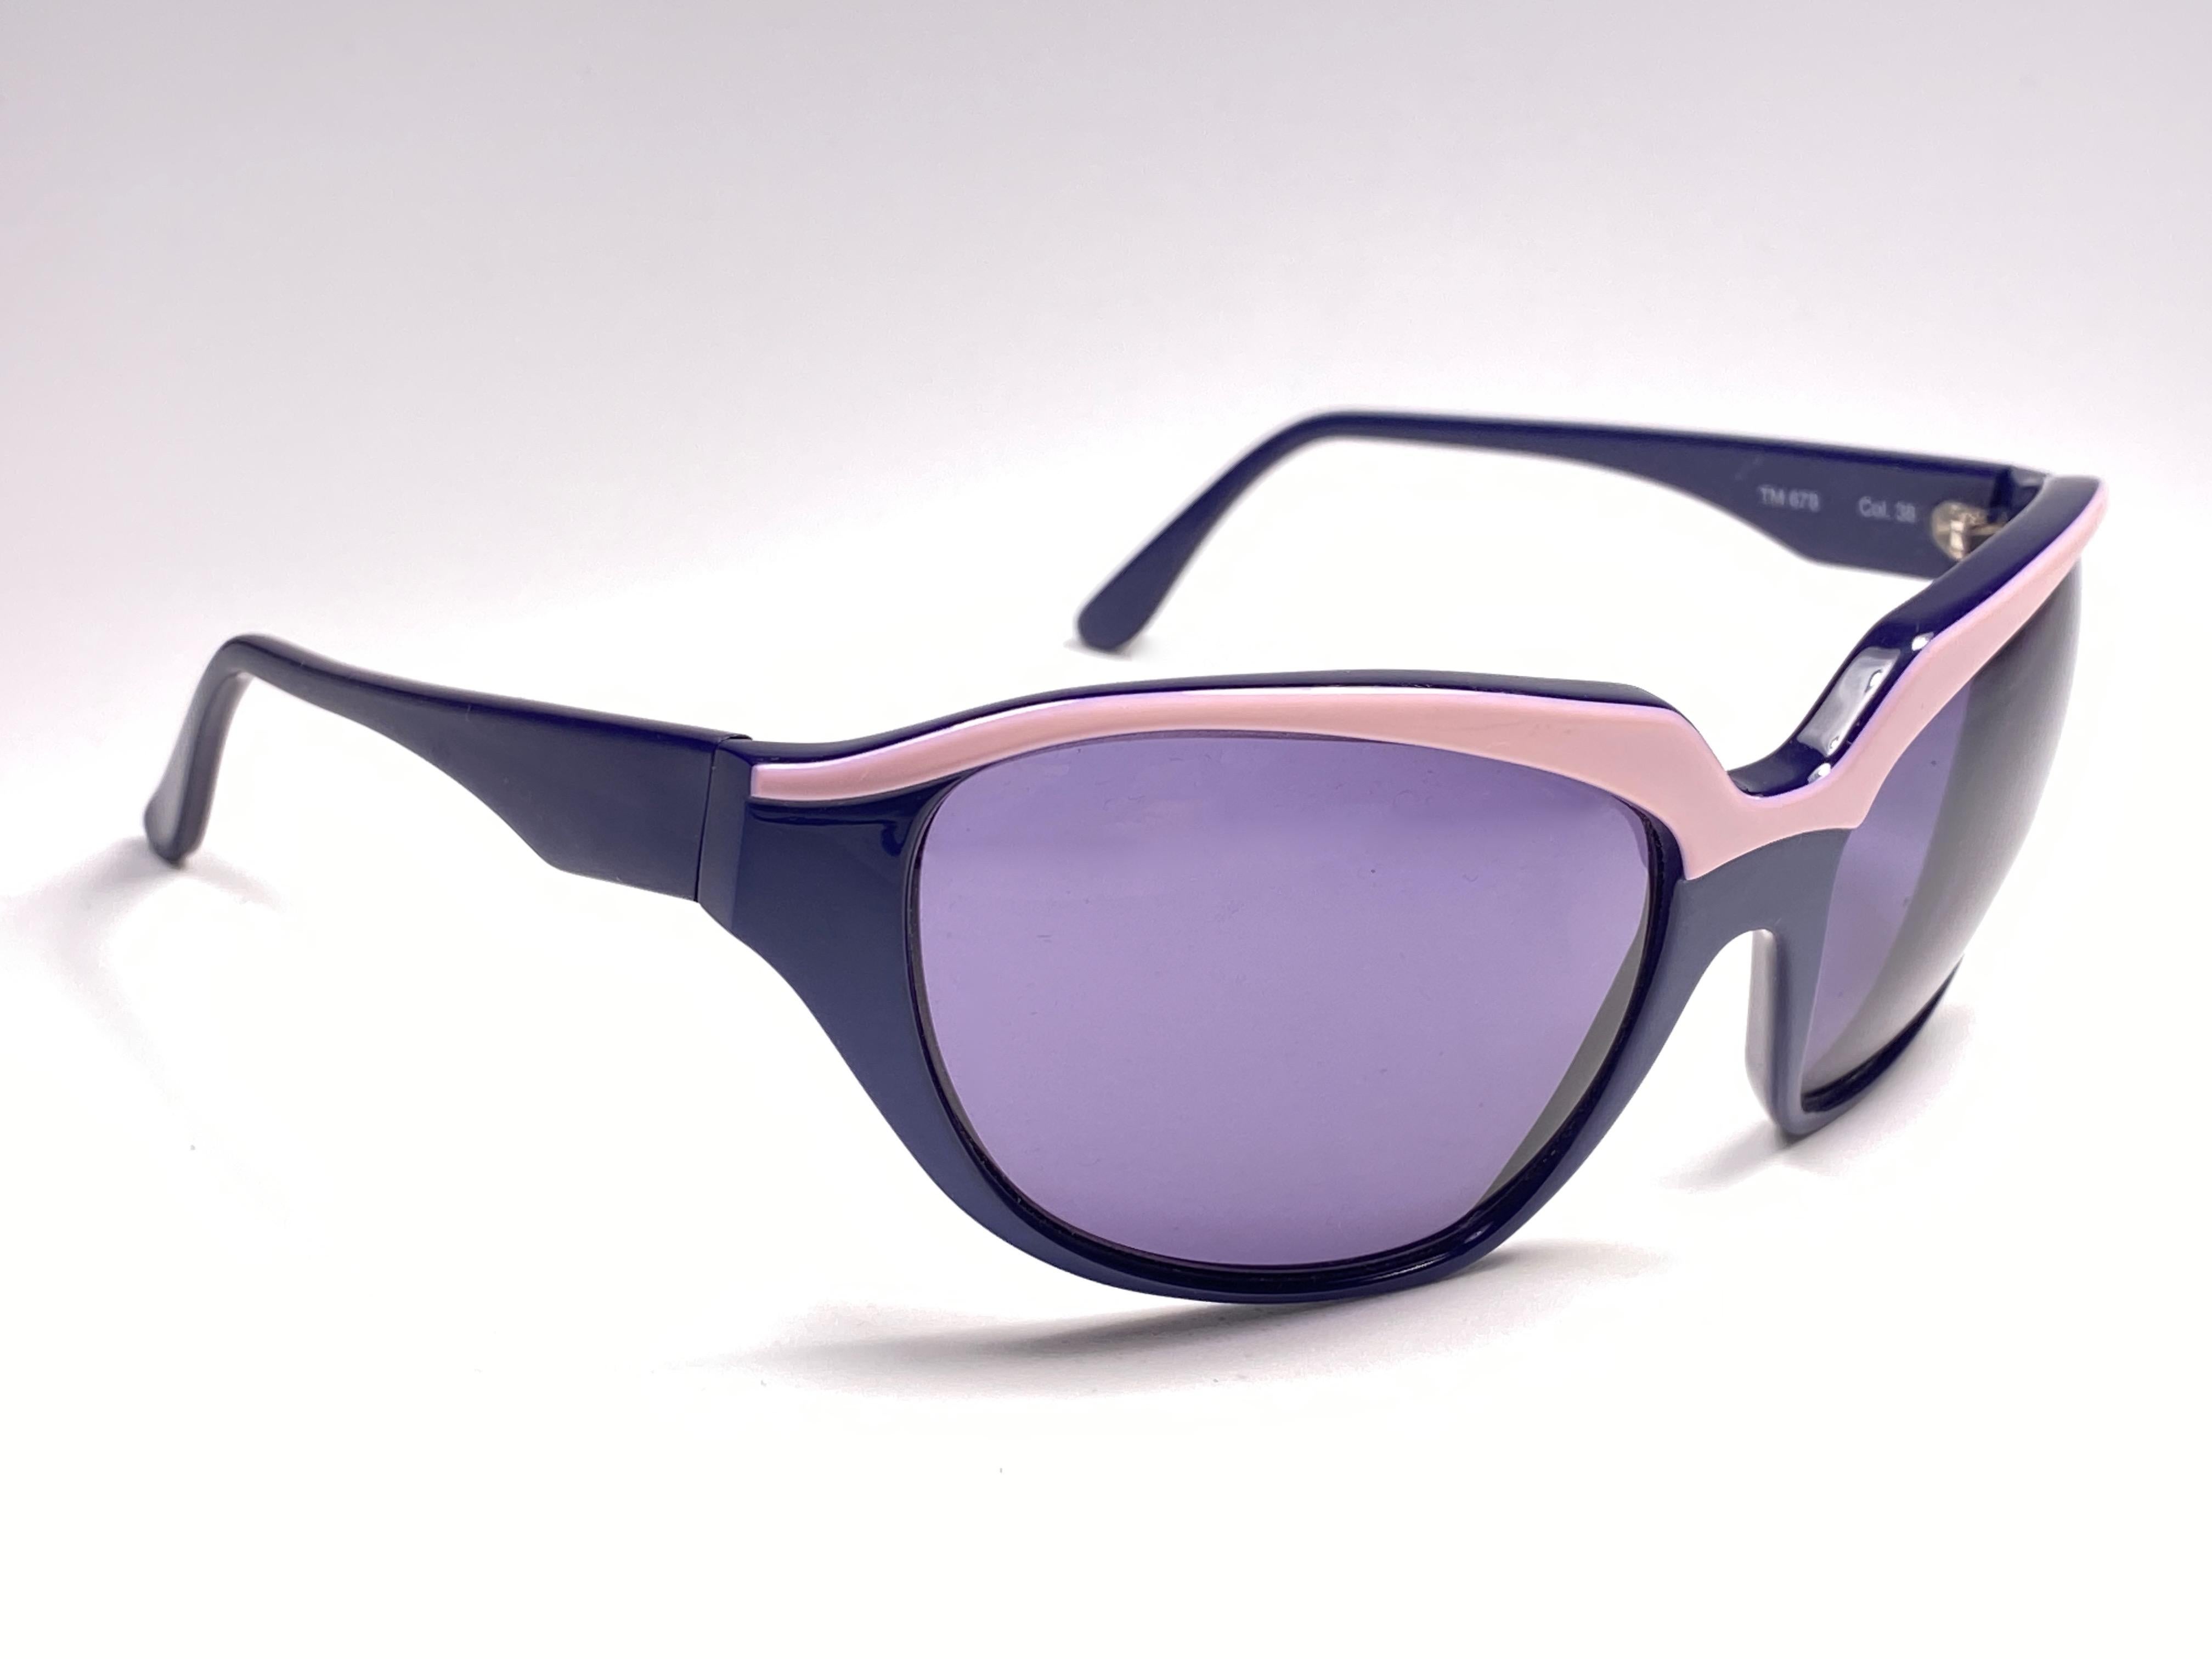 Super cool vintage THIERRY MUGLER 1980’s sunglasses. Bug eyed purple and pink frame with medium grey lenses.

This pair is an style statement. The piece could show minor sign of wear due to storage.

A great opportunity to achieve a unique and yet